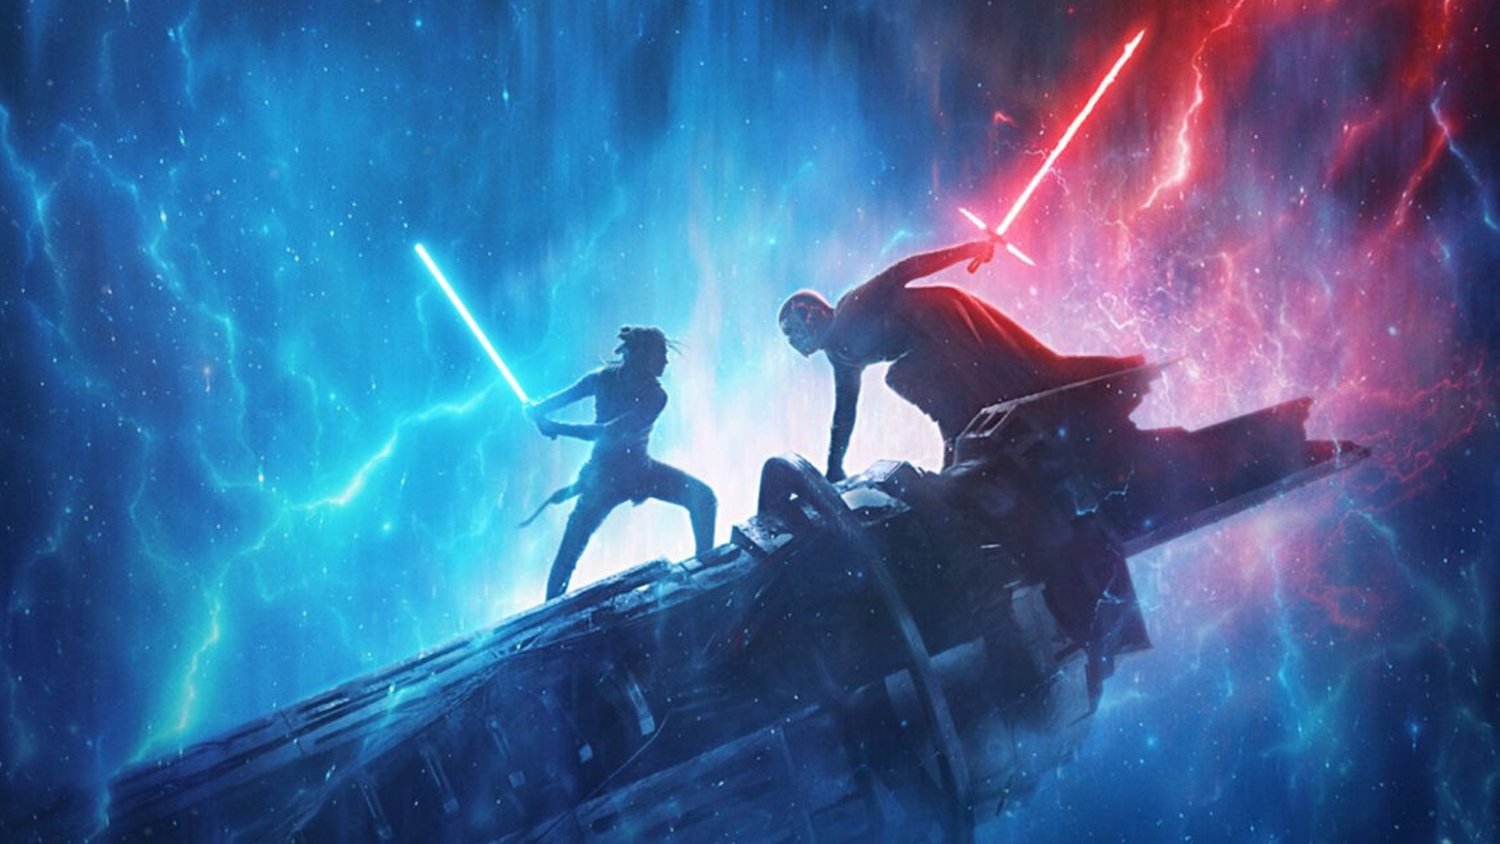 PEAKY BLINDERS Creator Steven Knight Will Write STAR WARS Project That Damon Lindelof Exited